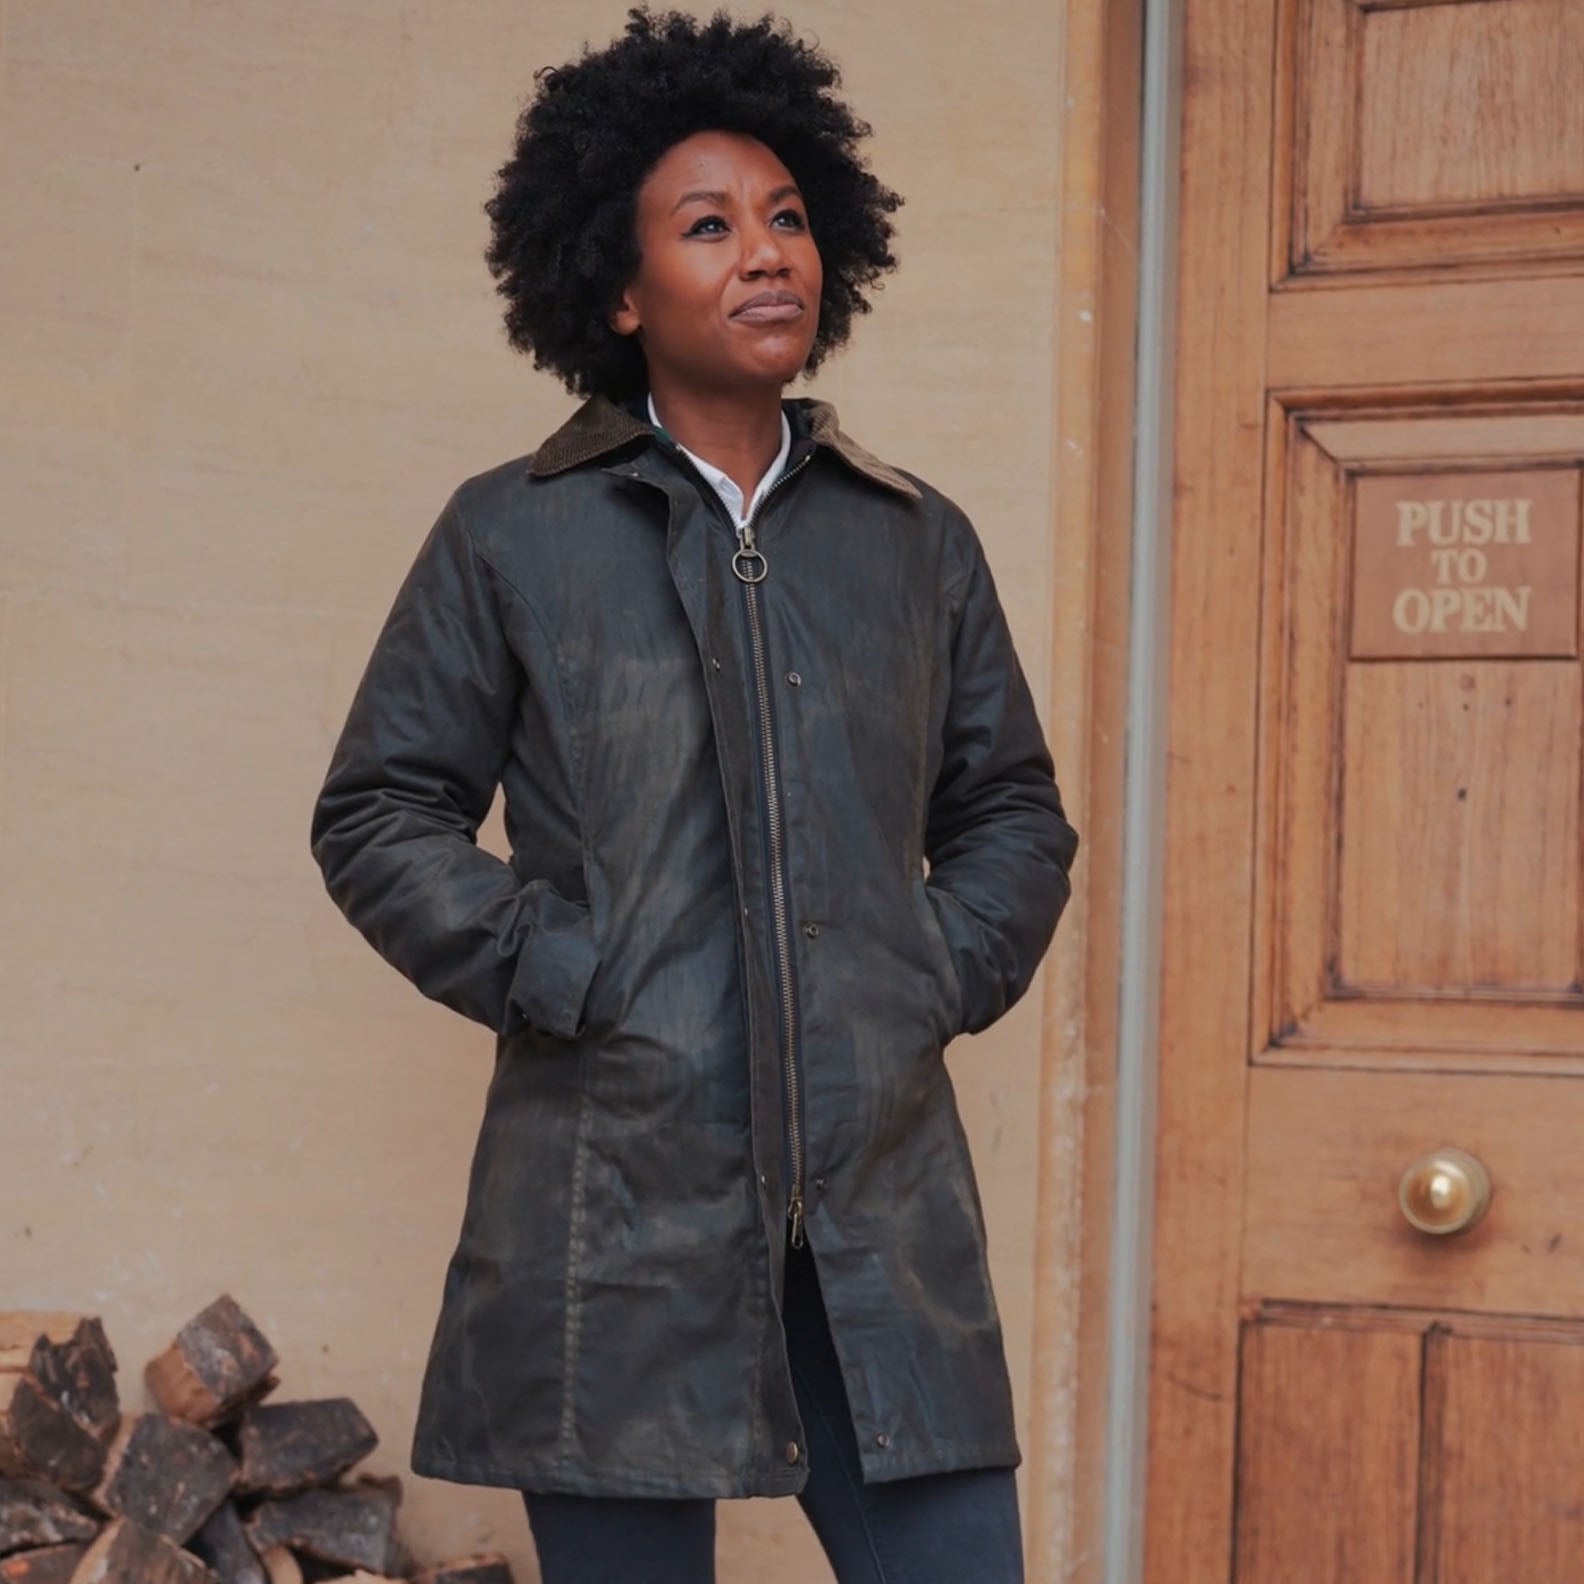 New Forest Ladies Longer Length Wax Jacket